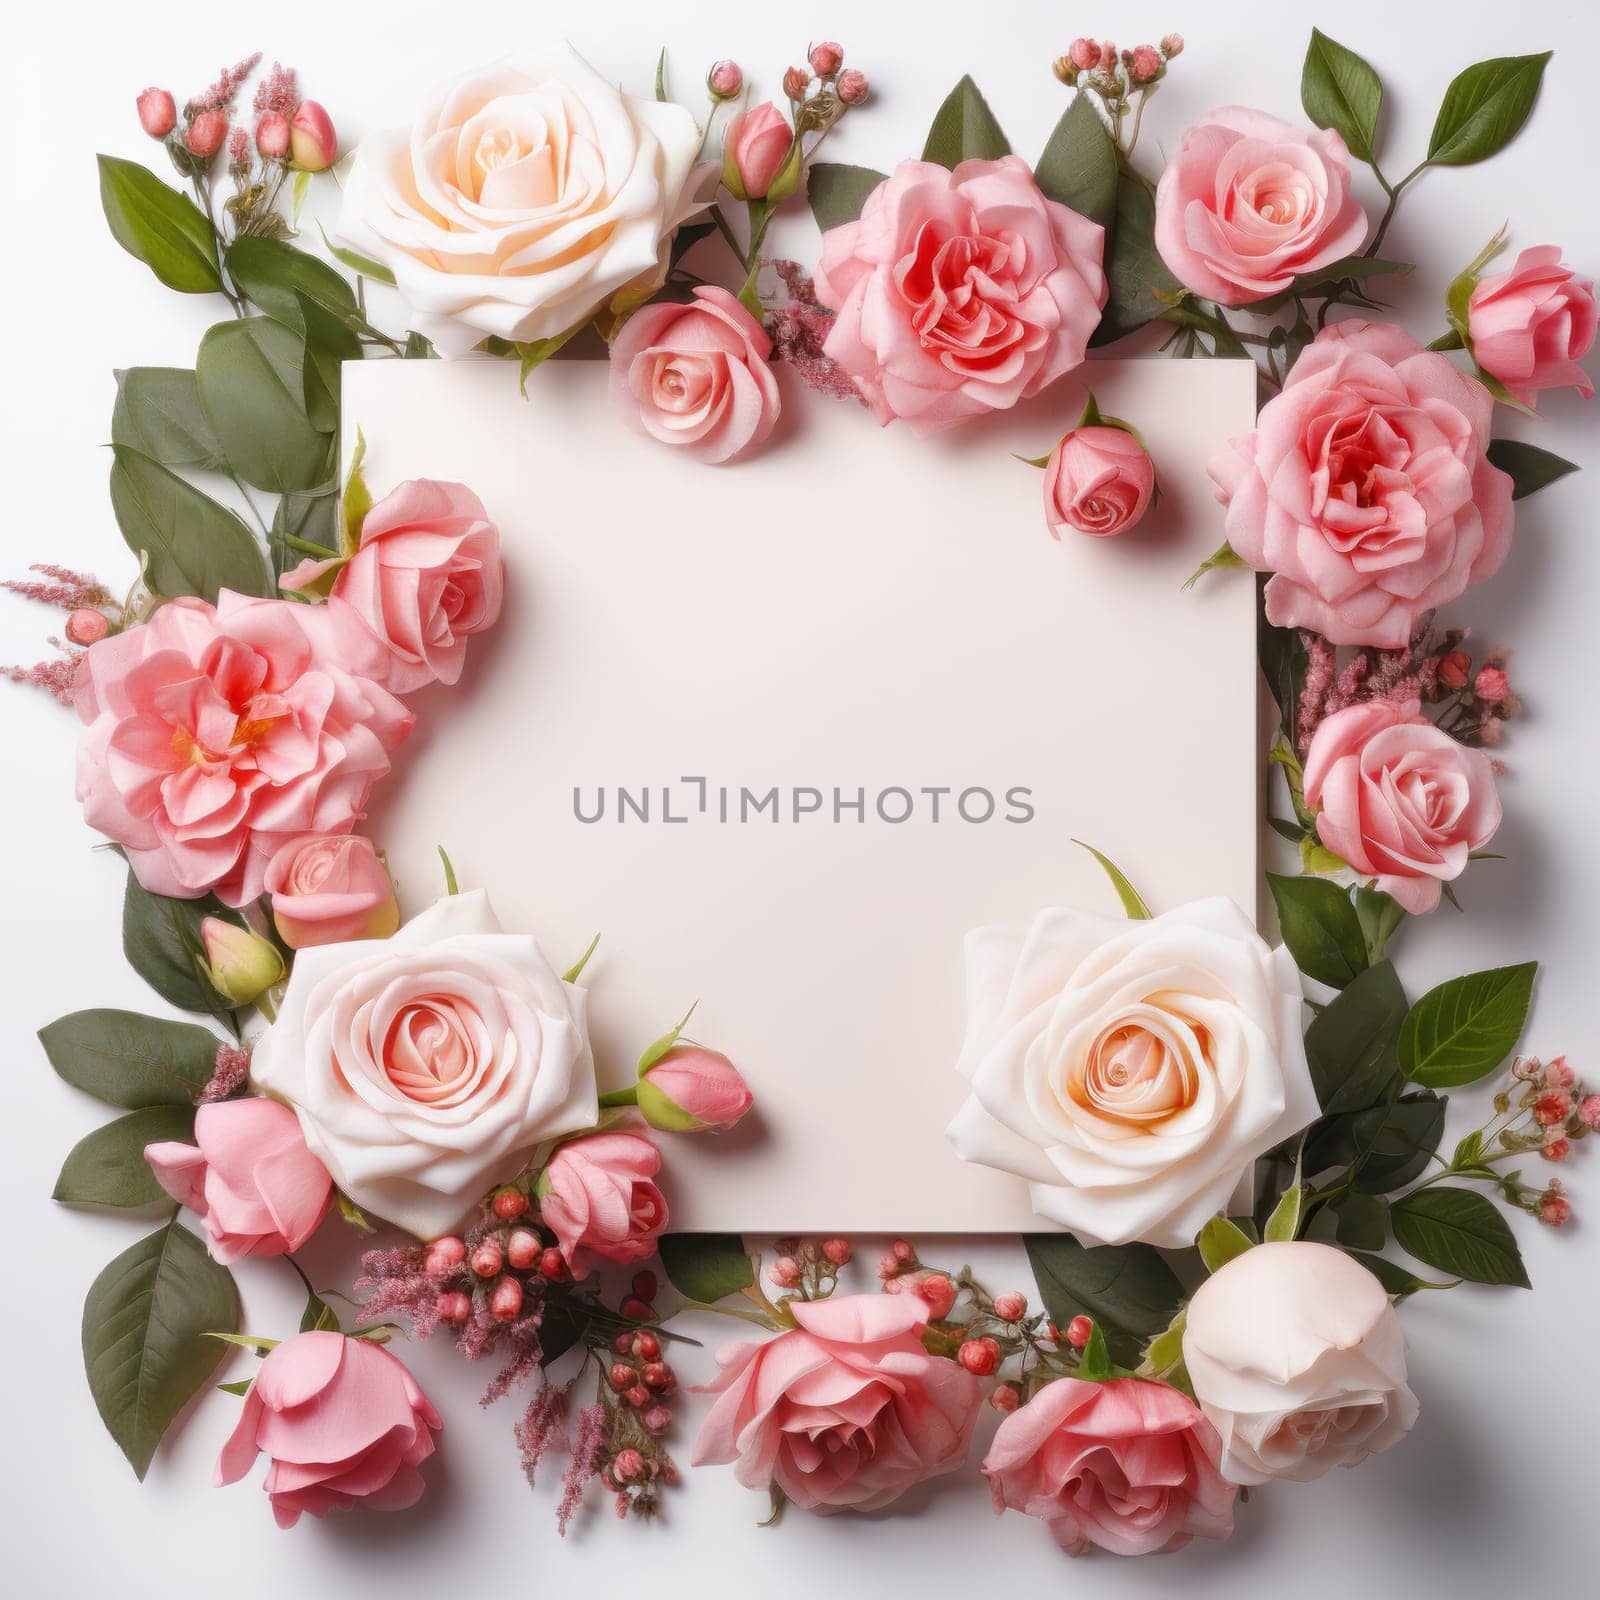 Frame of roses, set of roses and flowers floral wreath or picture invitation greeting card mockup with empty blank space template for wedding and romantic anniversary celebration concepts.